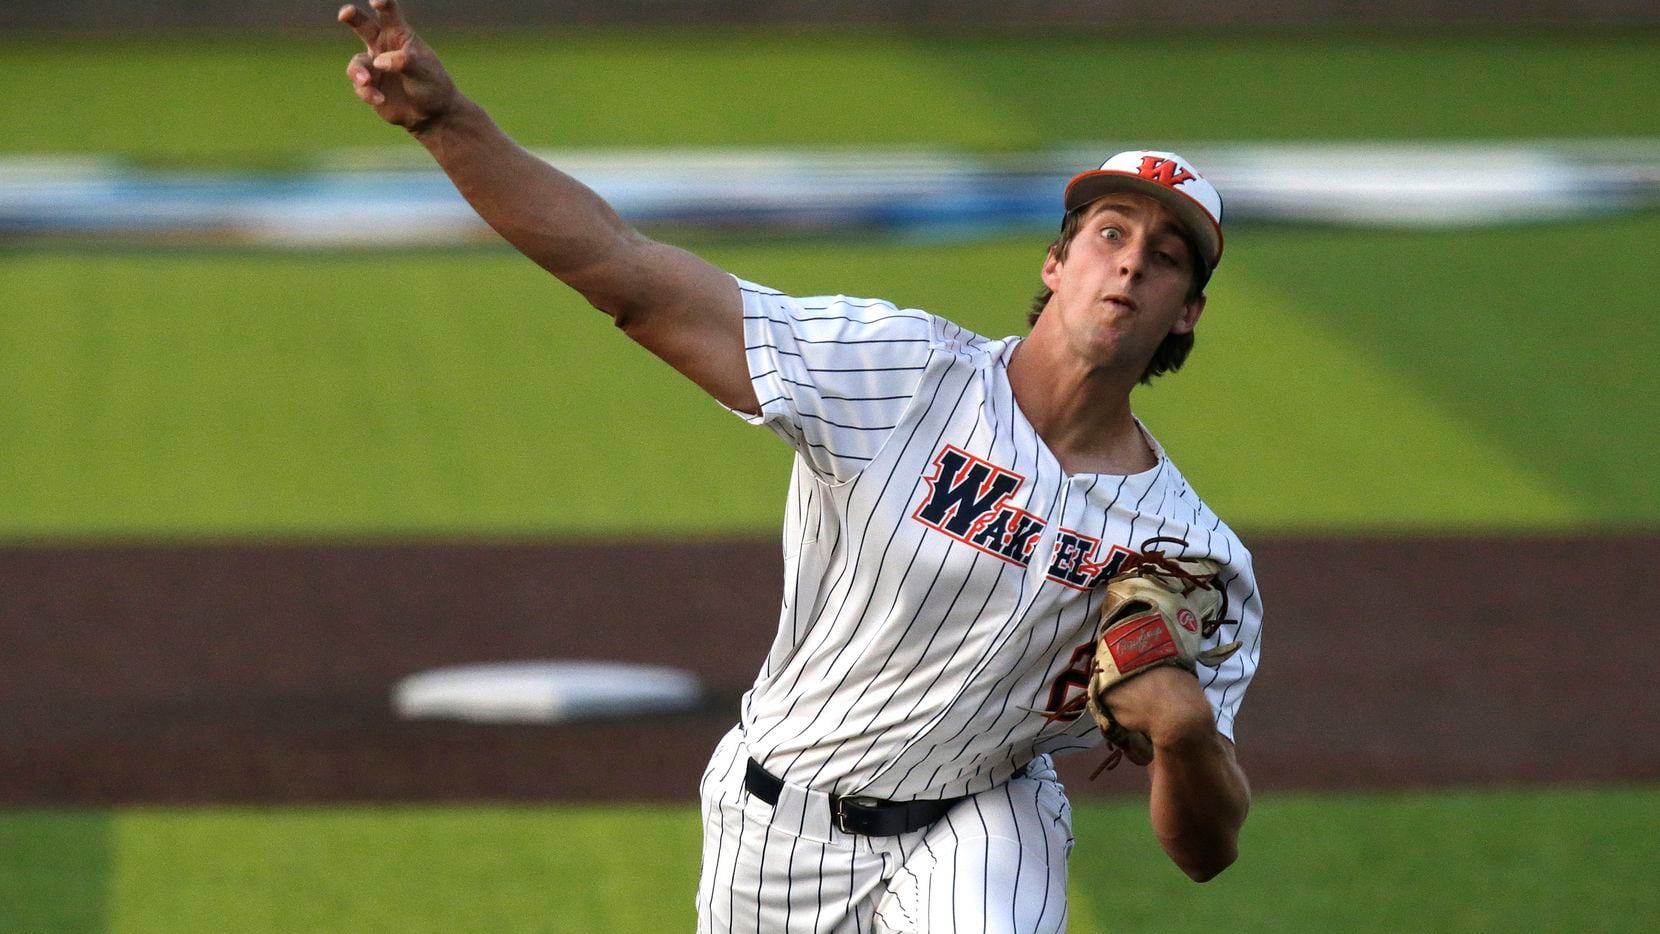 Wakeland High School pitcher Carson Priebe (22) delivers a pitch in the first inning as...